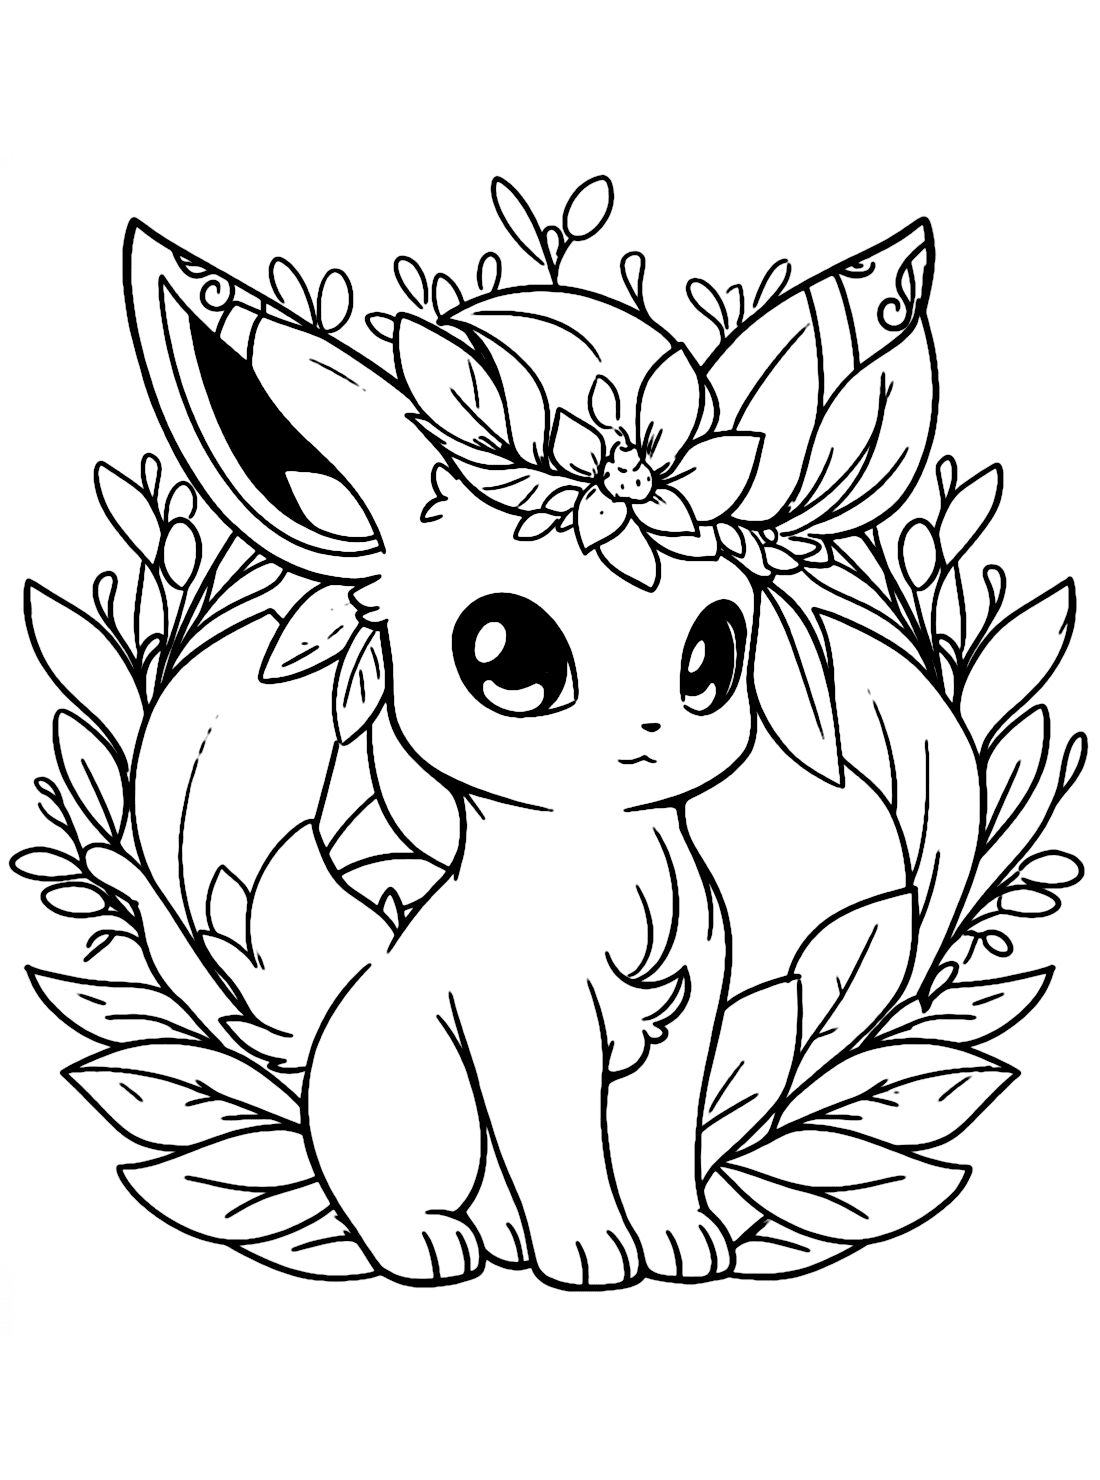 Glaceon Leafeon Coloring Pages